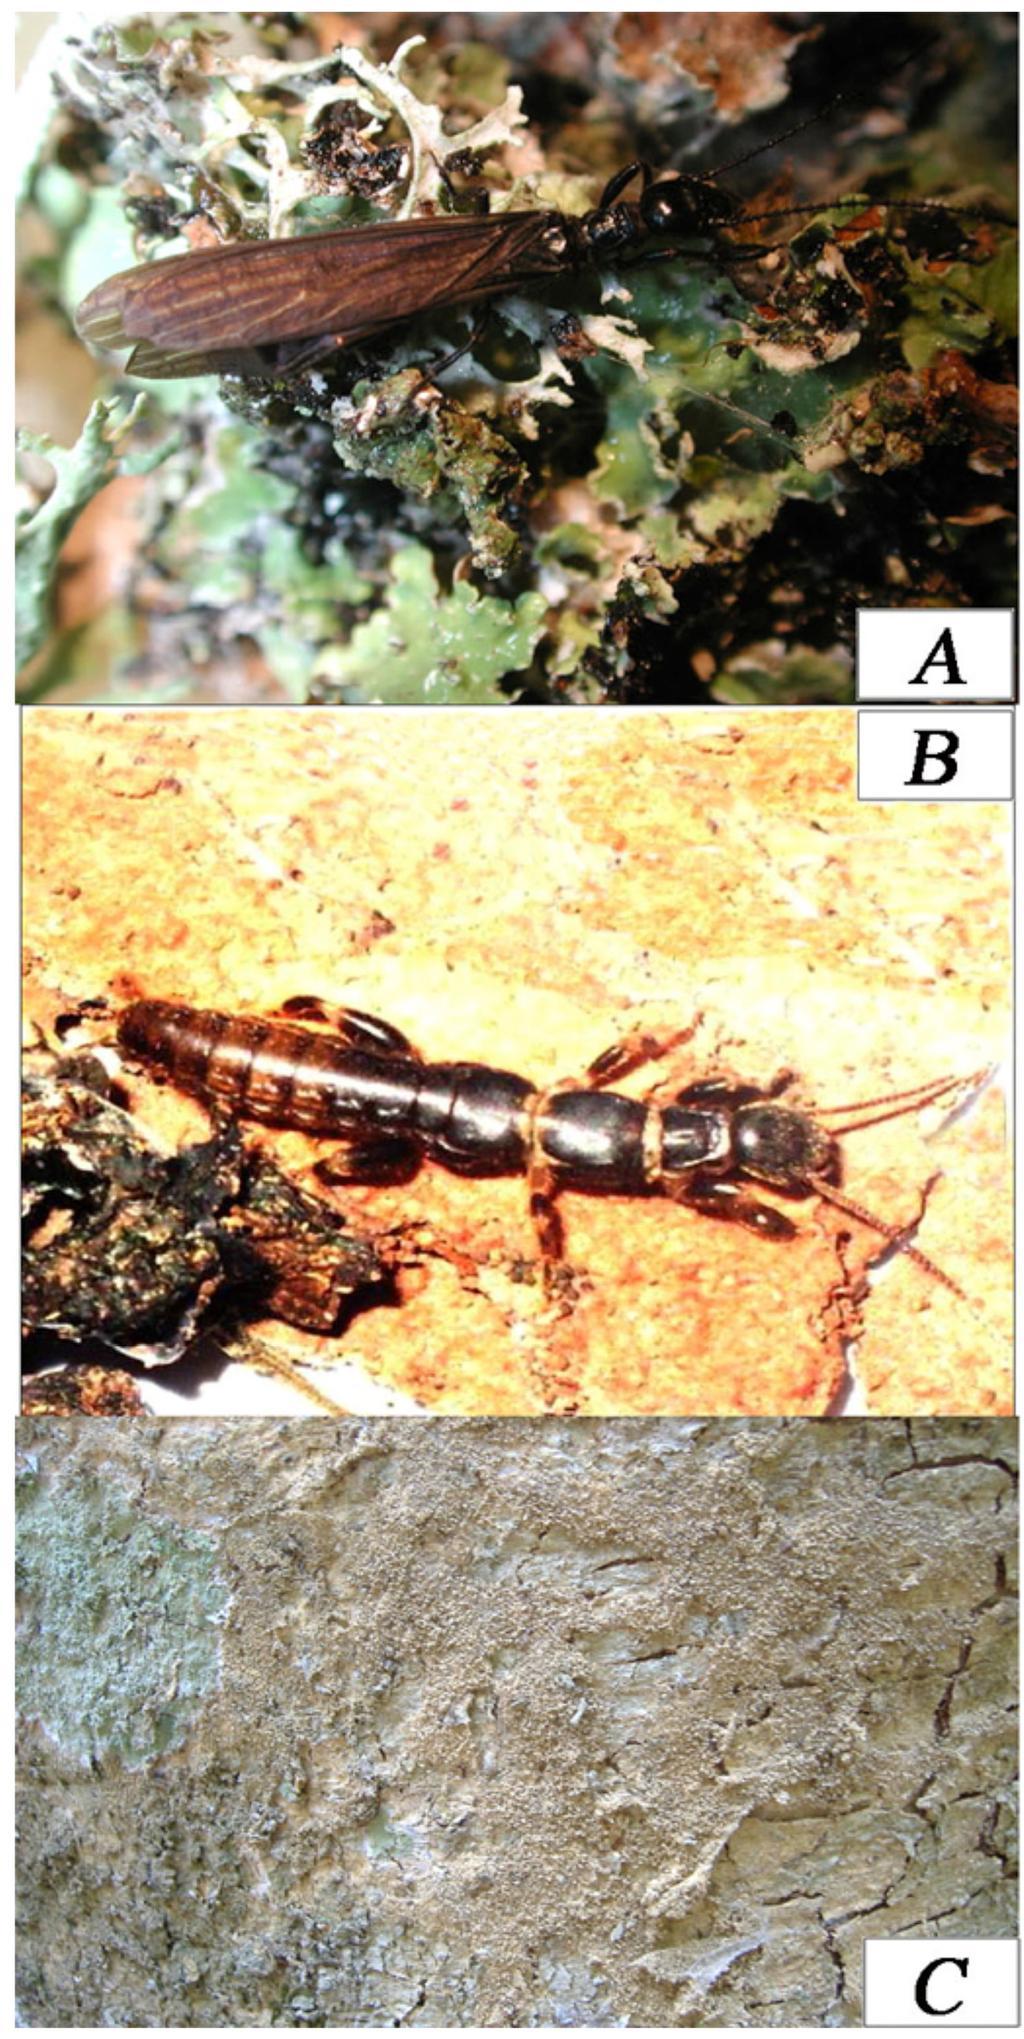 FIGURE 1. Ptilocerembia thaidina sp. n. (A) male, (B) female and (C) a silk gallery showing the silk camouflaged by gathered materials, including frass, stitched onto its surface by the occupants.